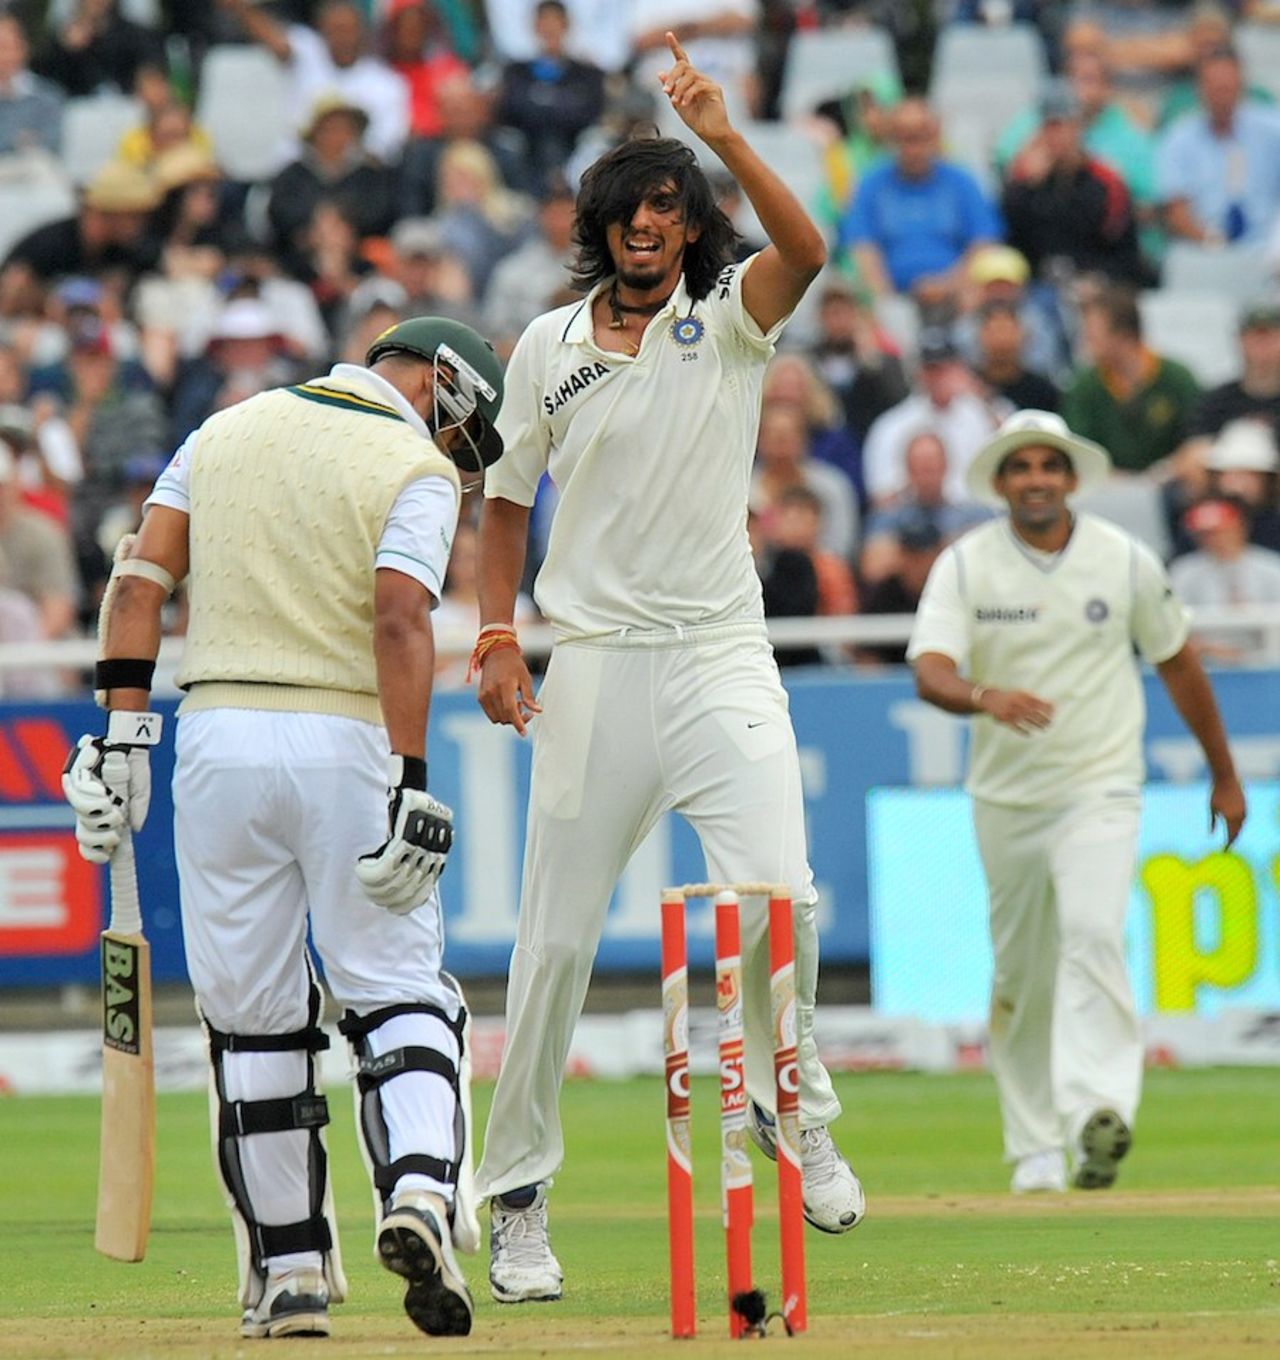 Ishant Sharma had Alviro Petersen caught behind, South Africa v India, 3rd Test, Cape Town, 1st day, January 2, 2011